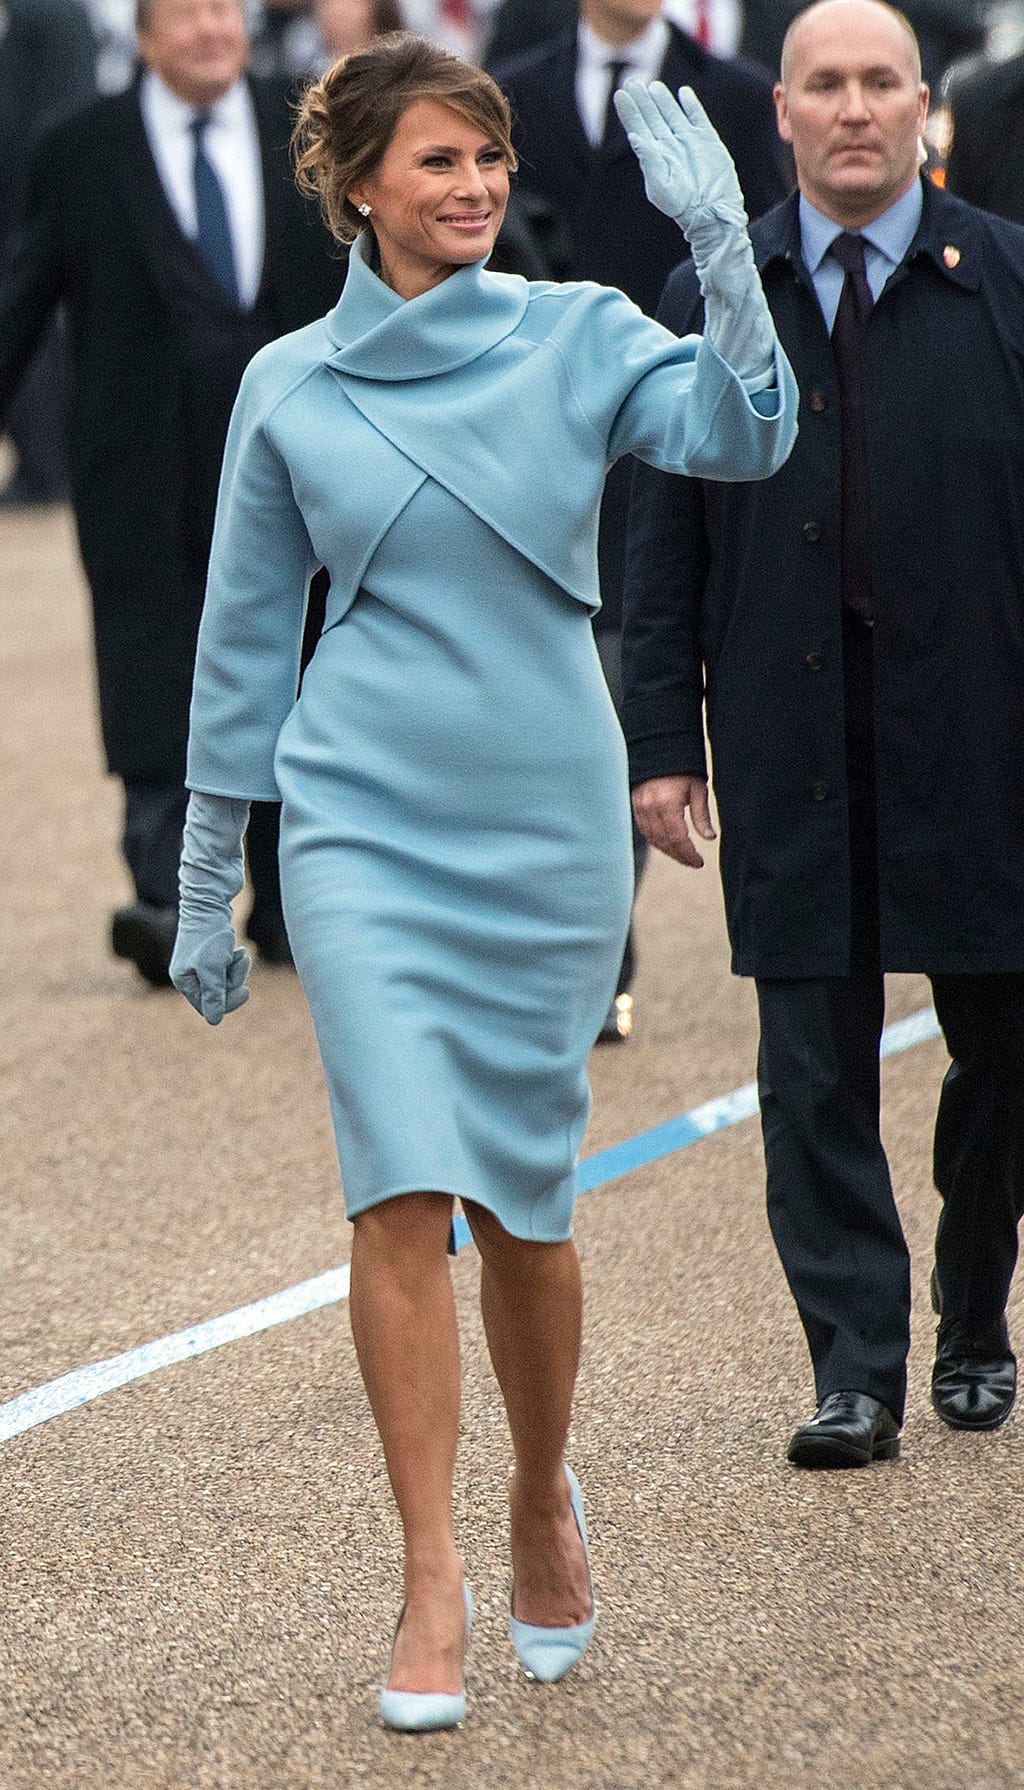 First lady Melania Trump waves to supporters in the inaugural parade on January 20, 2017, in Washington, DC.